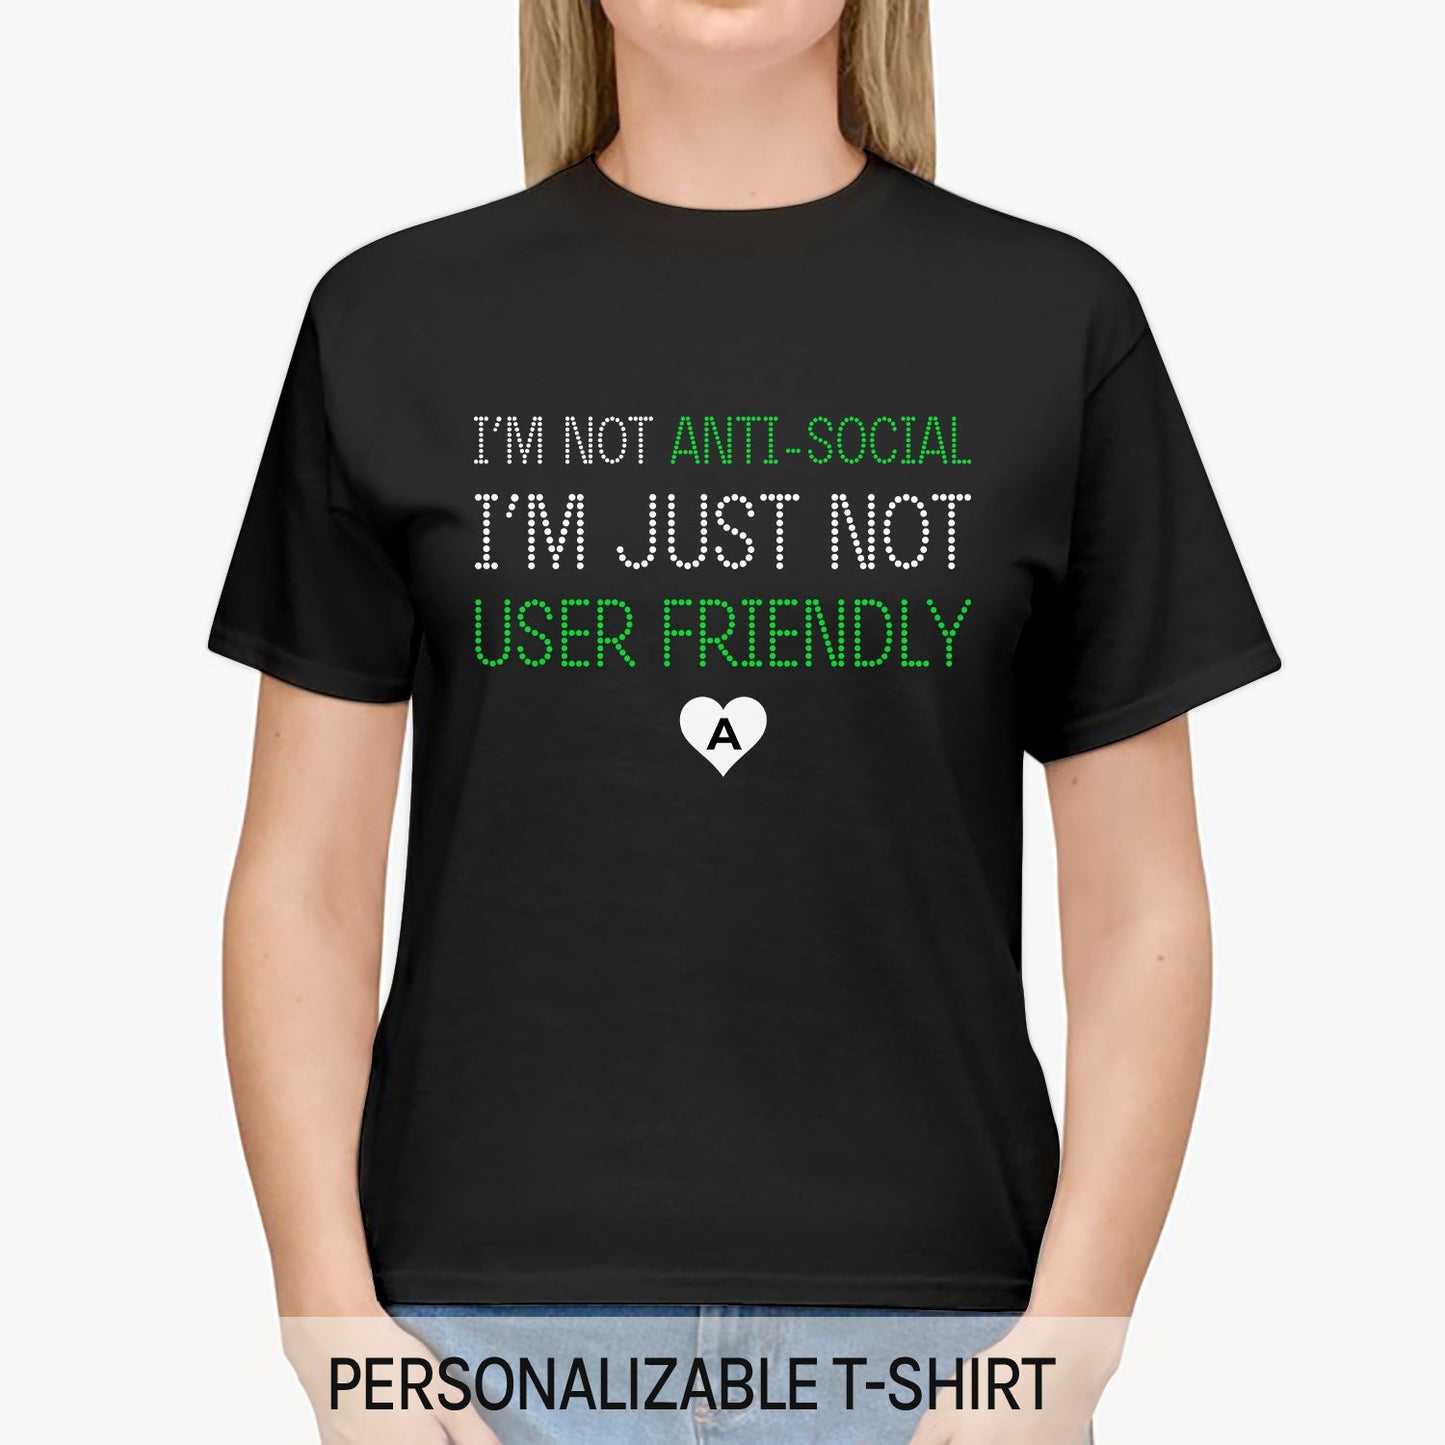 I'm just not user-friendly. - Personalized Birthday gift for Software Engineer - Custom Tshirt - MyMindfulGifts